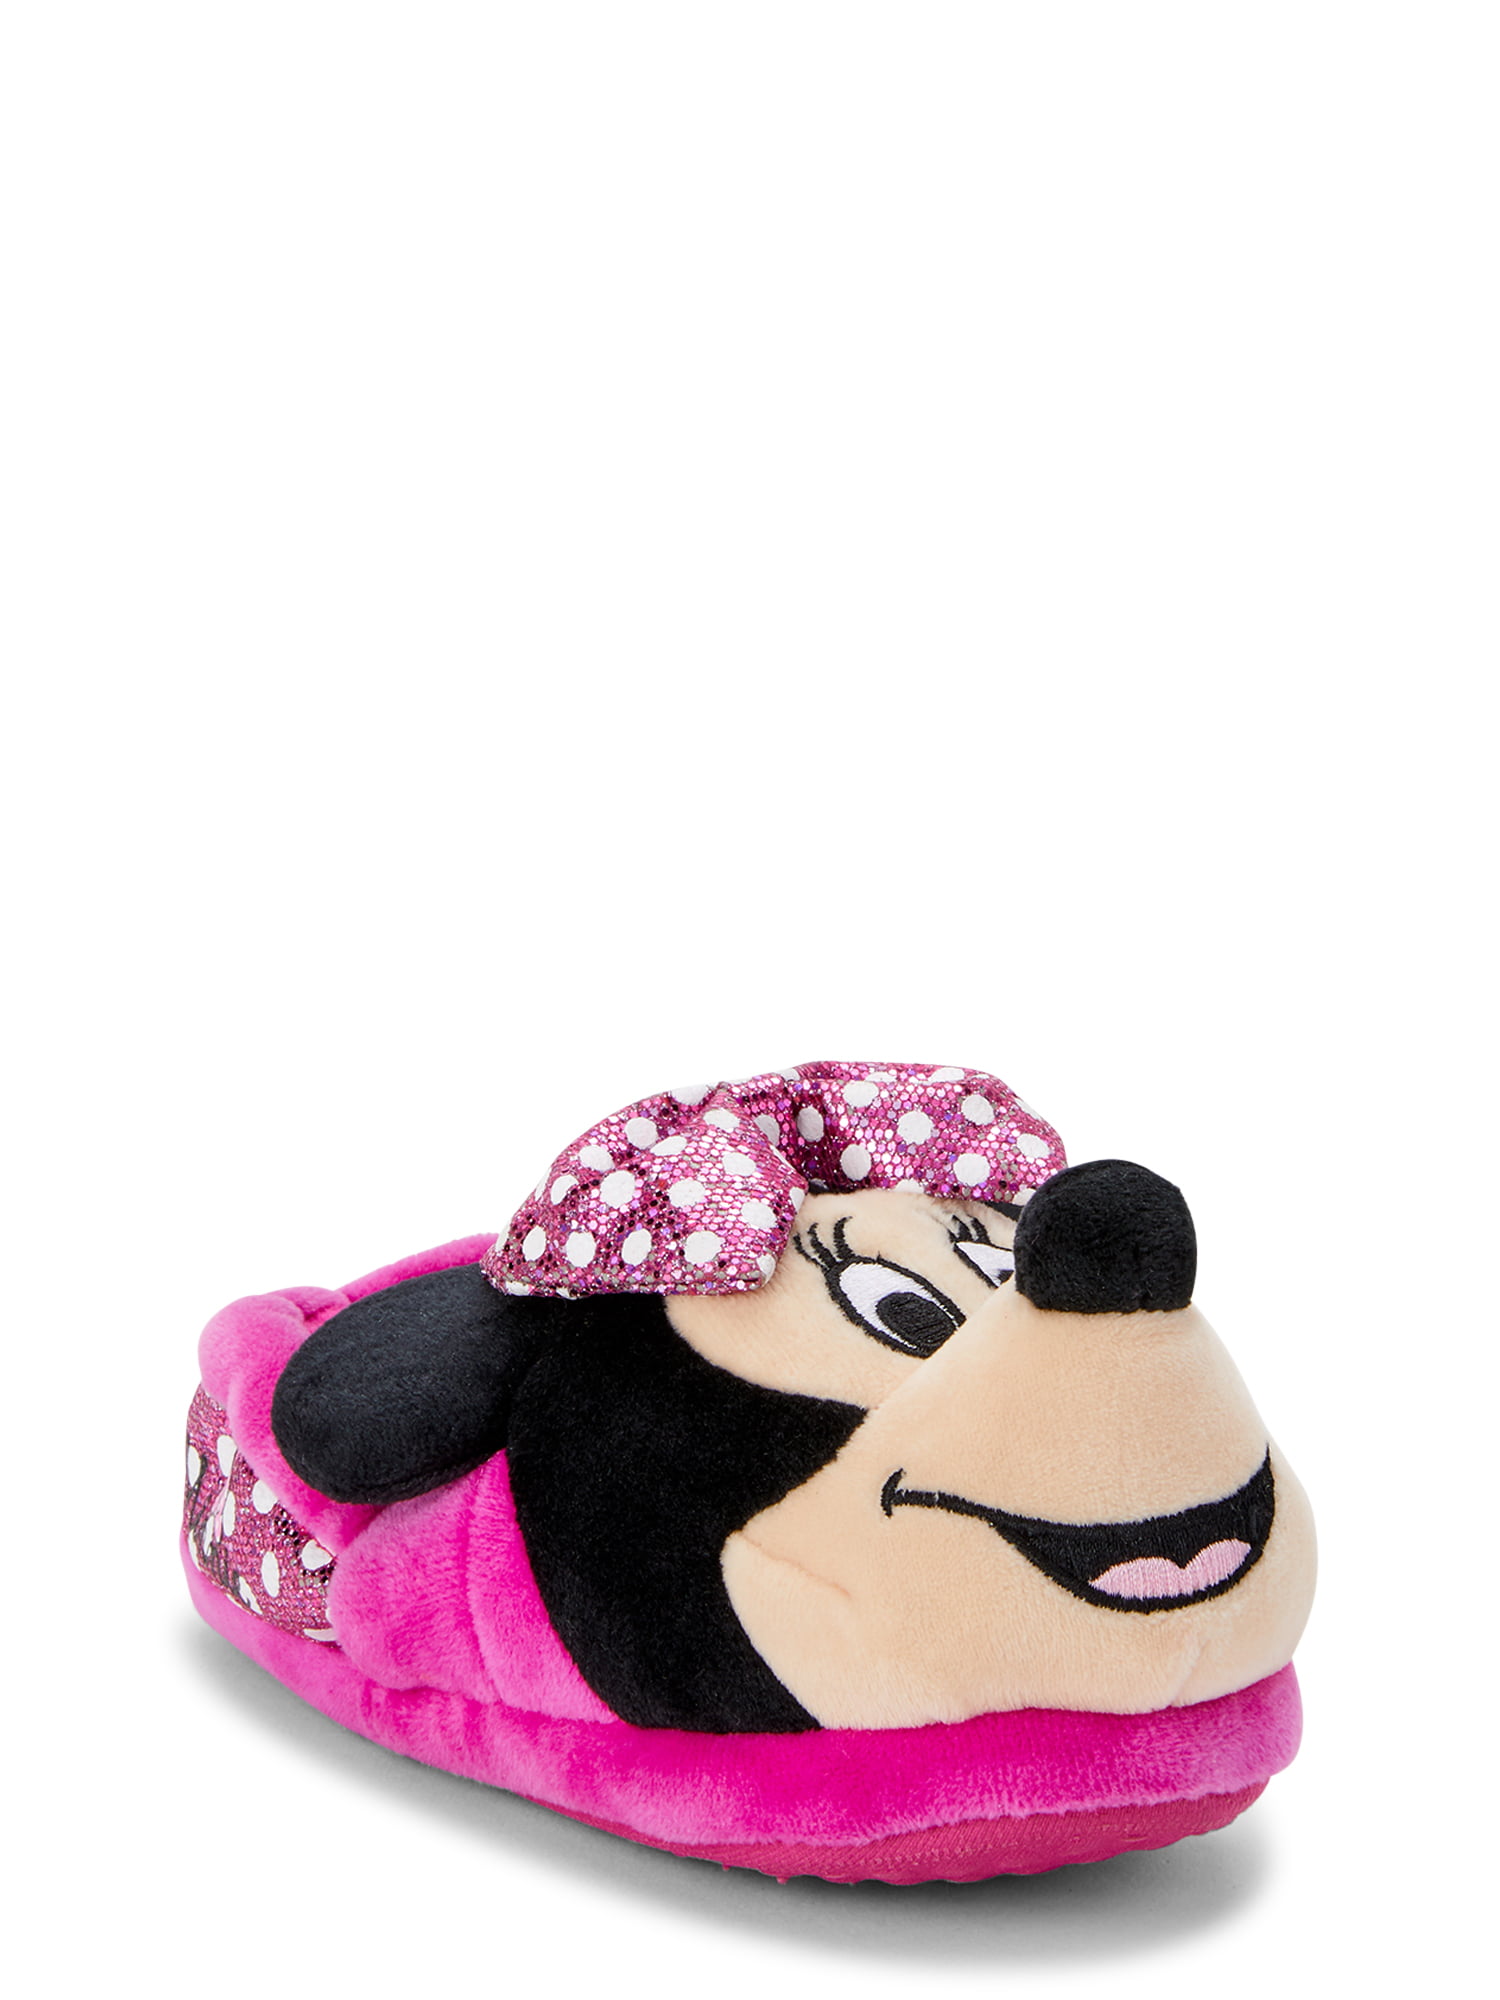 Disney TODDLER Girls Minnie Mouse Slippers-Pink/Polka Dot 143L 